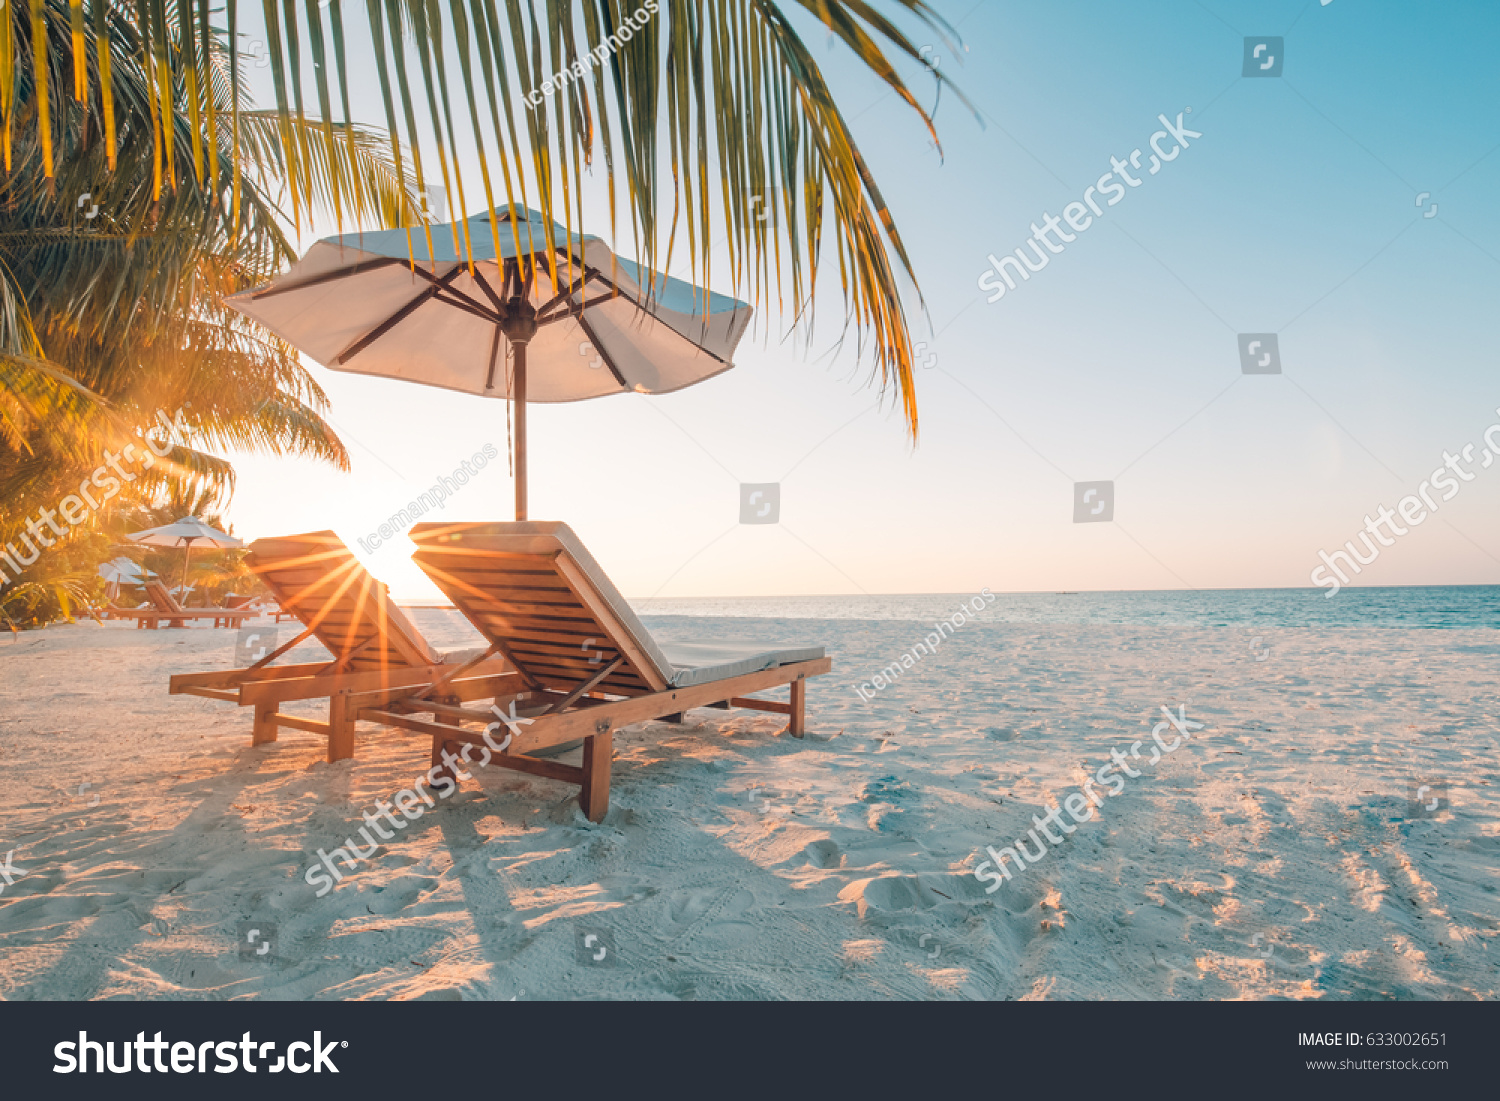 Beautiful beach. Chairs on the sandy beach near the sea. Summer holiday and vacation concept for tourism. Inspirational tropical landscape #633002651